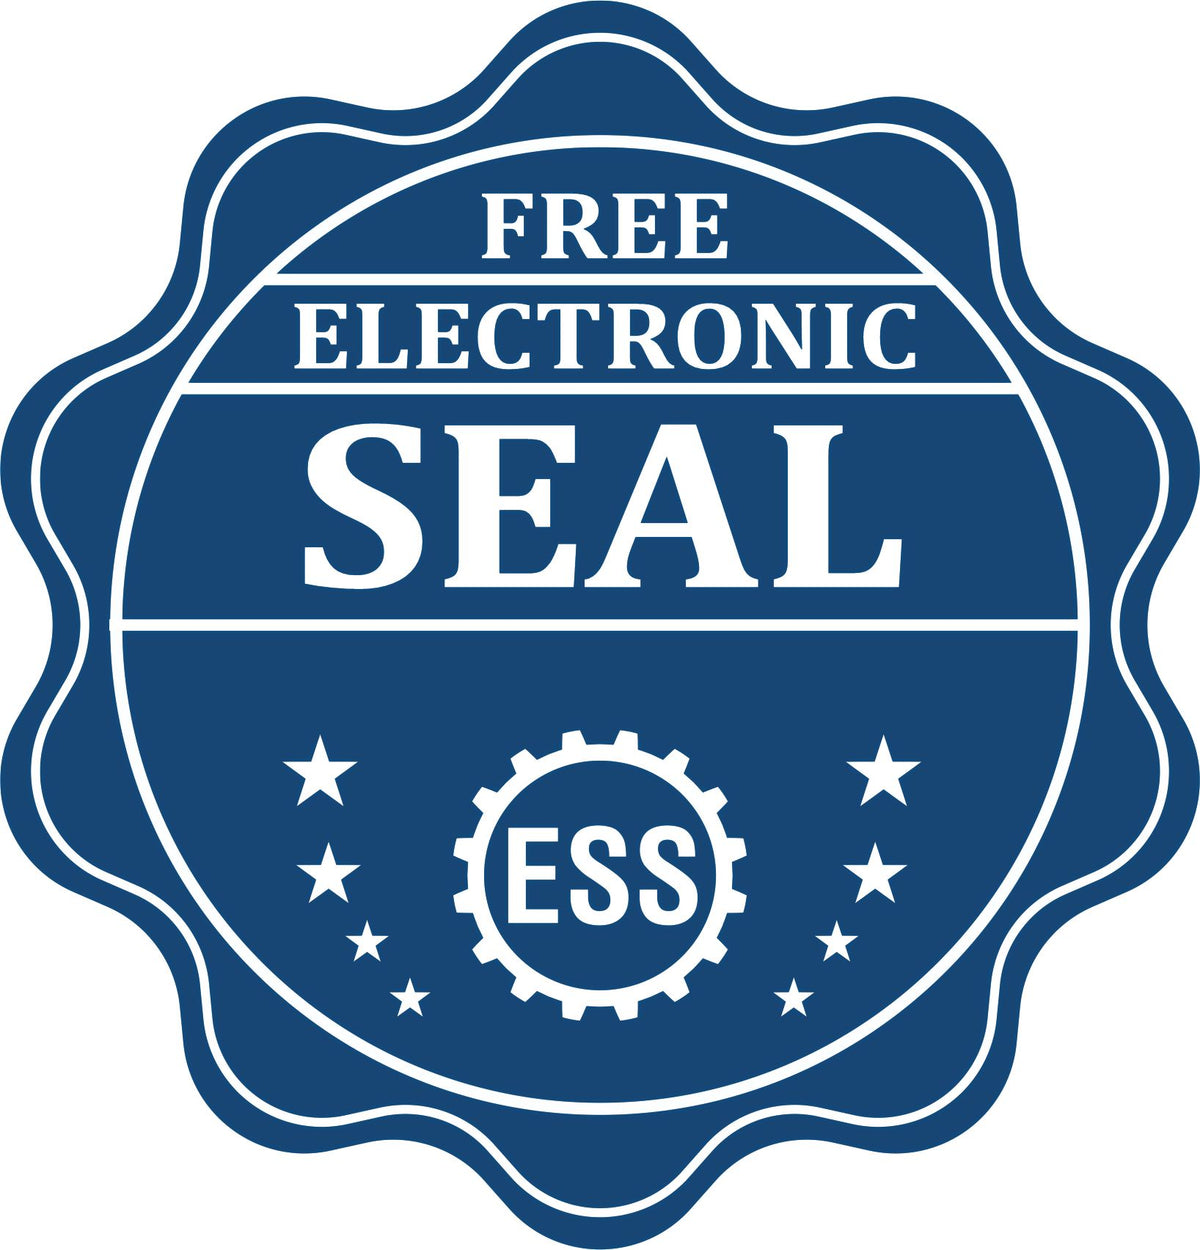 A badge showing a free electronic seal for the Long Reach Louisiana PE Seal with stars and the ESS gear on the emblem.